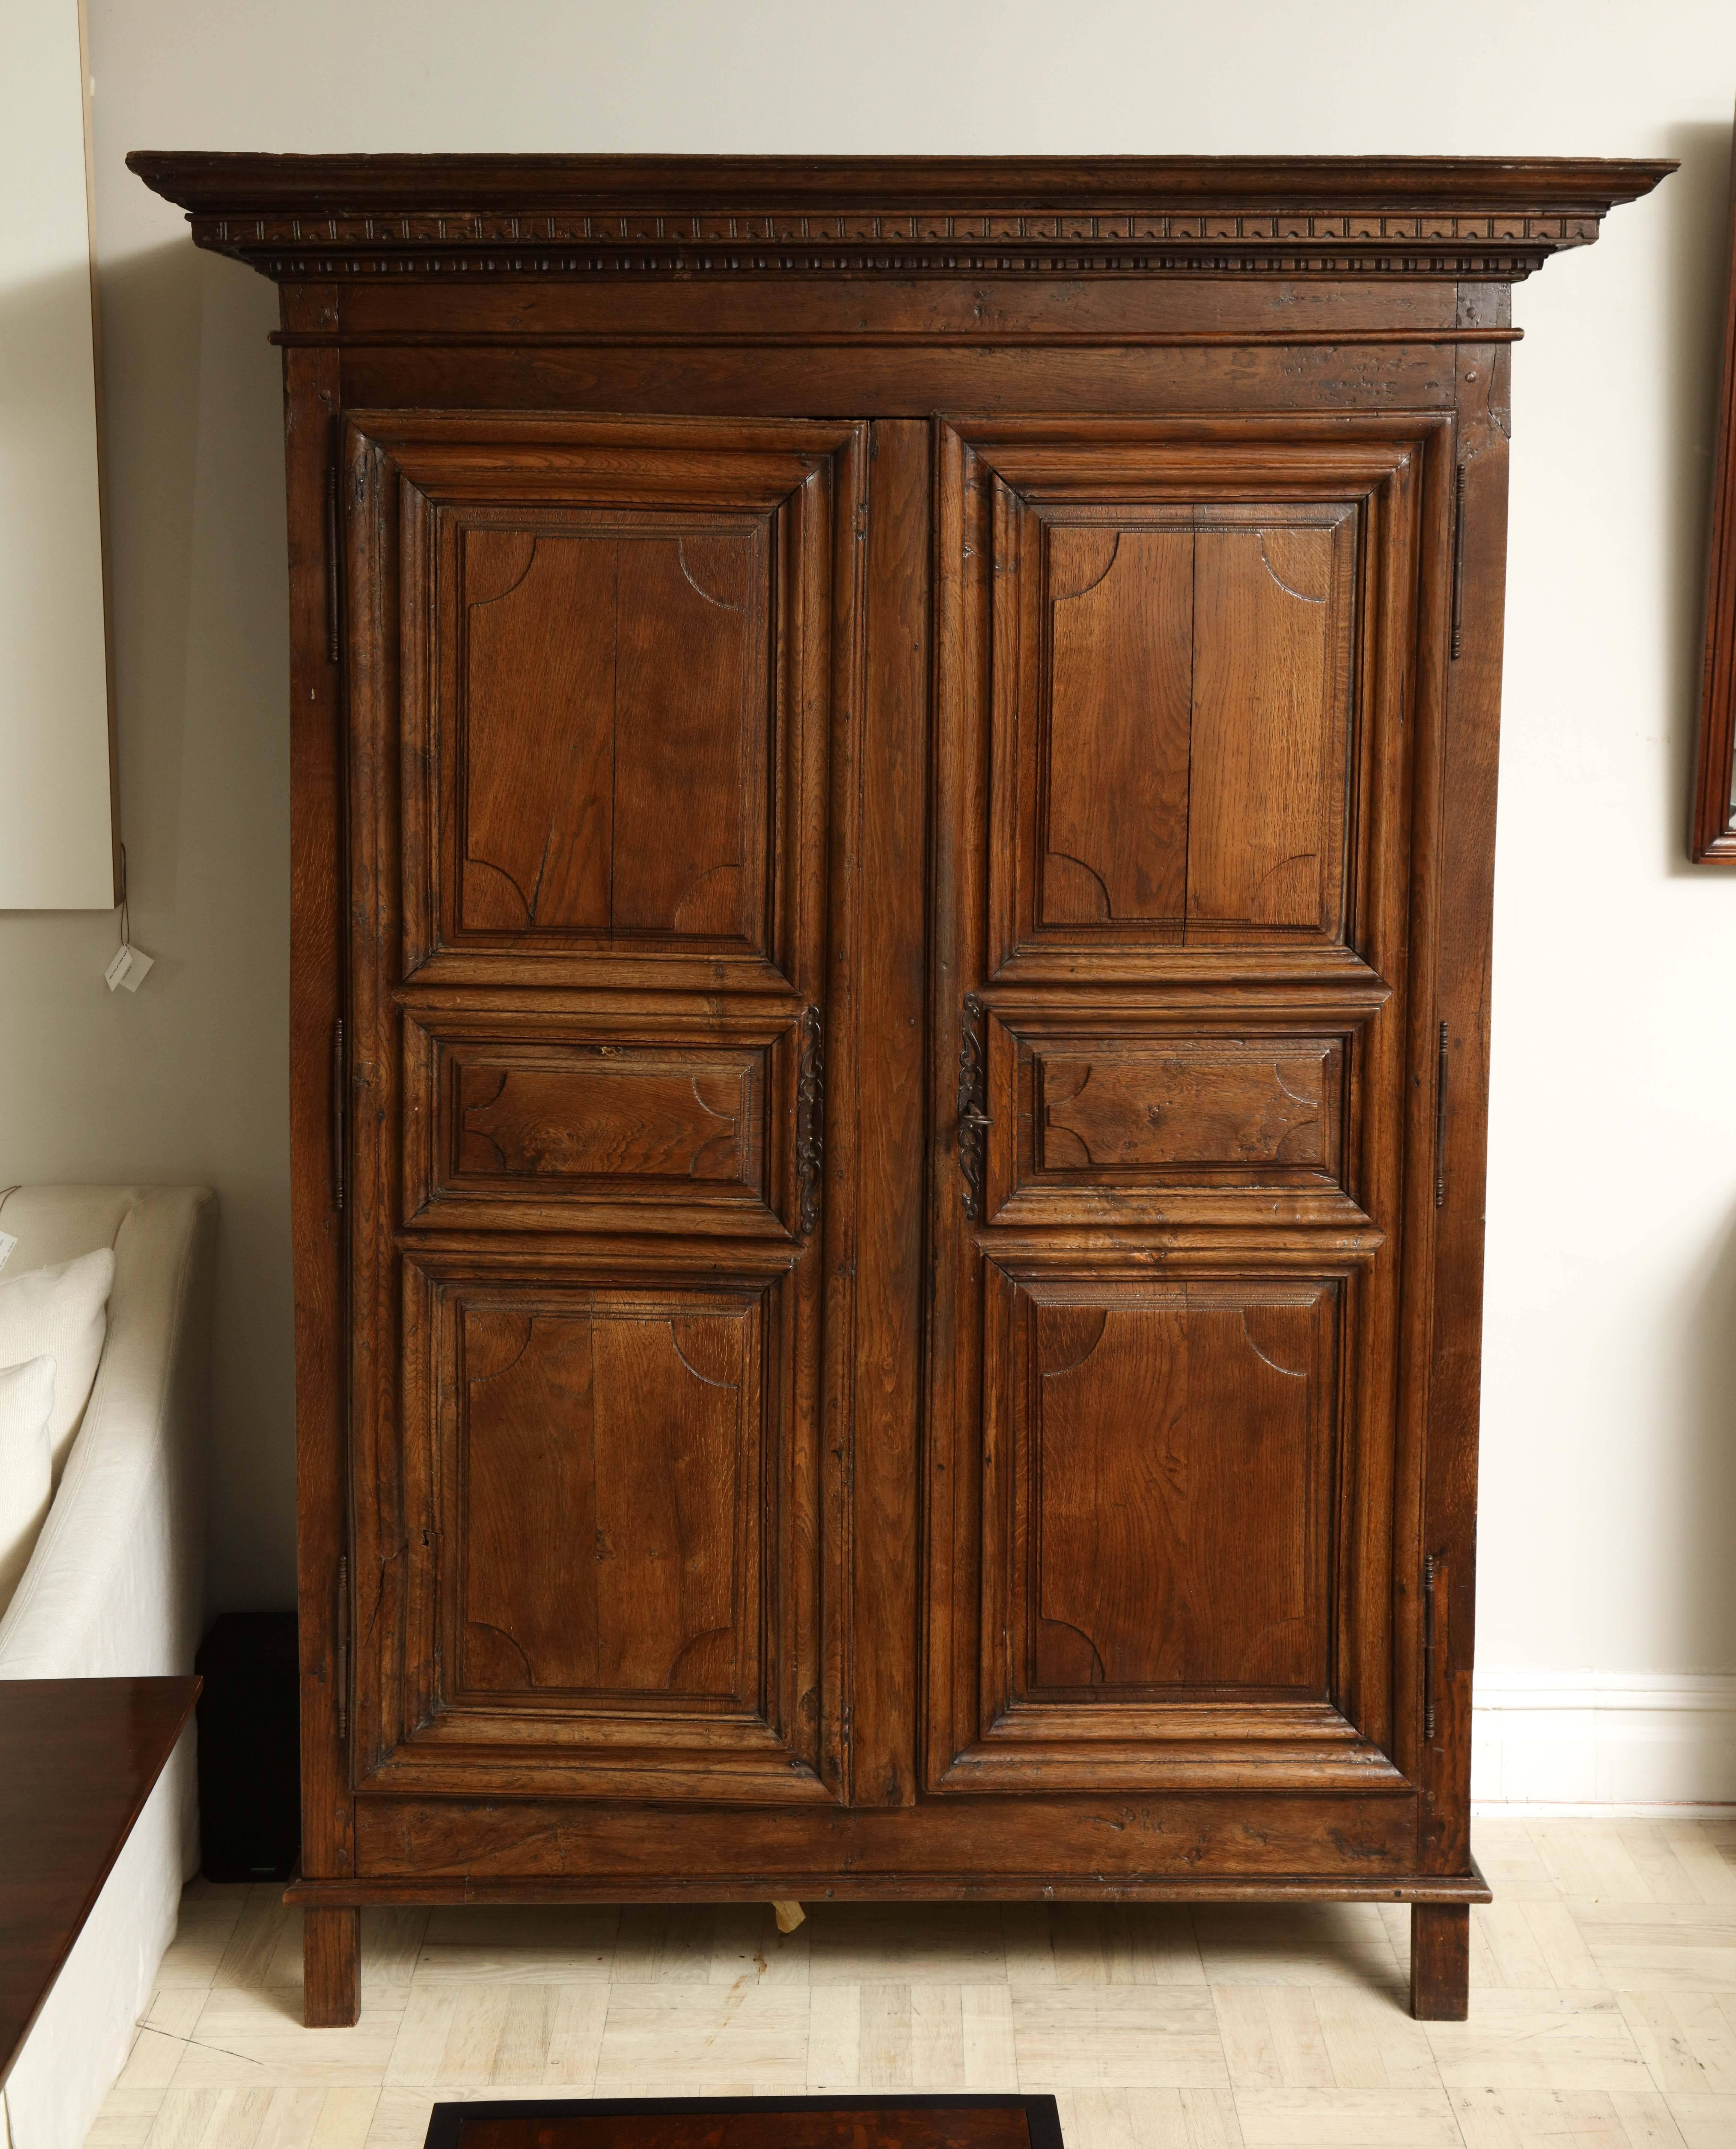 Late 18th century oak armoire, two doors, stepped cornice, square legs.